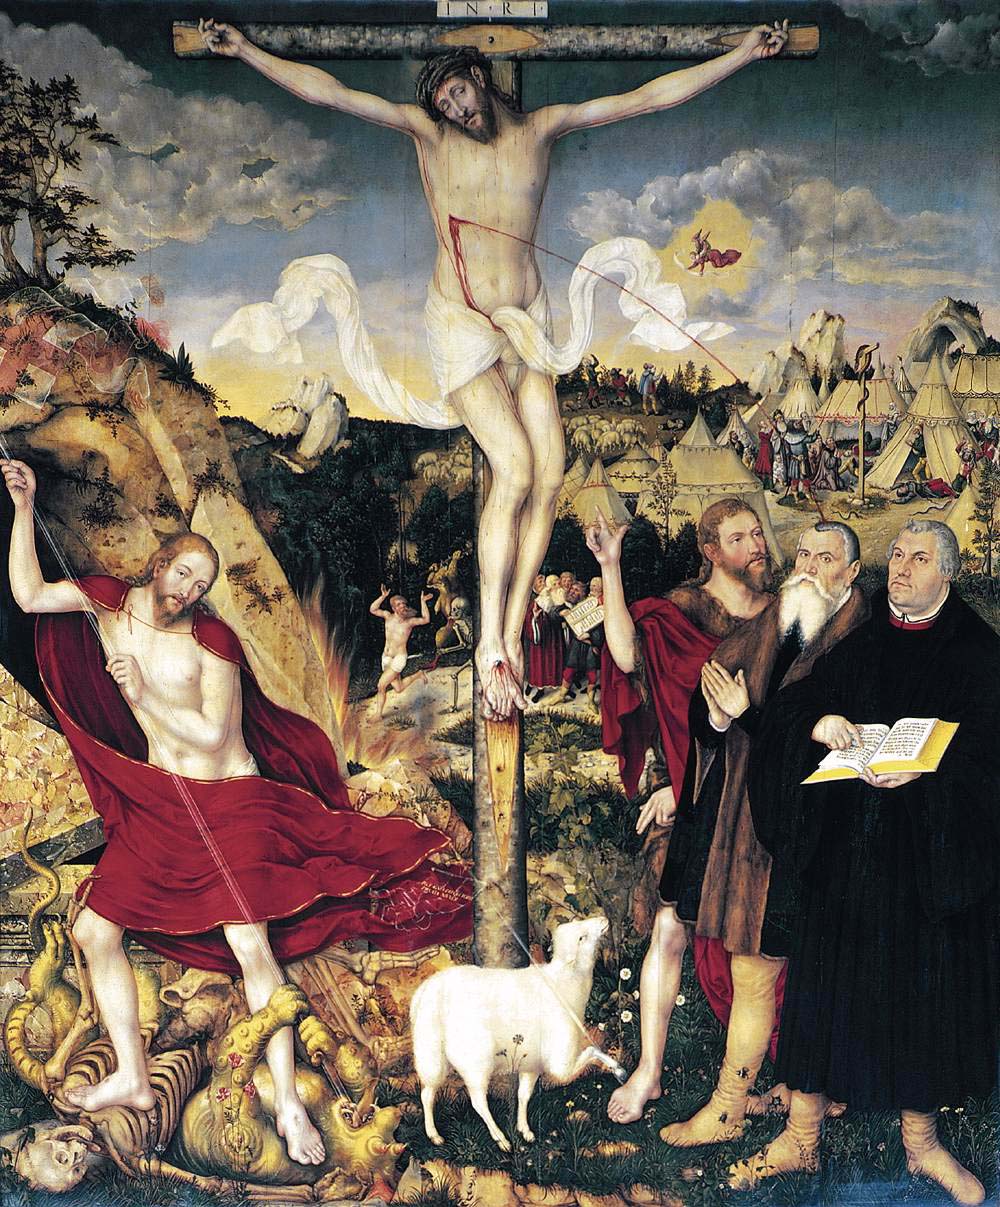 Central panel of the altarpiece in the Herderkirche in Weimar. The remarkable triptych was begun by Lucas Cranach the Elder in 1552/53, shortly before his death, and completed in 1555 by his son Lucas Cranach the Younger. It is regarded as a major work of art of the 16th century in Saxony and Thuringia. You can see Martin Luther on the right holding a bible.